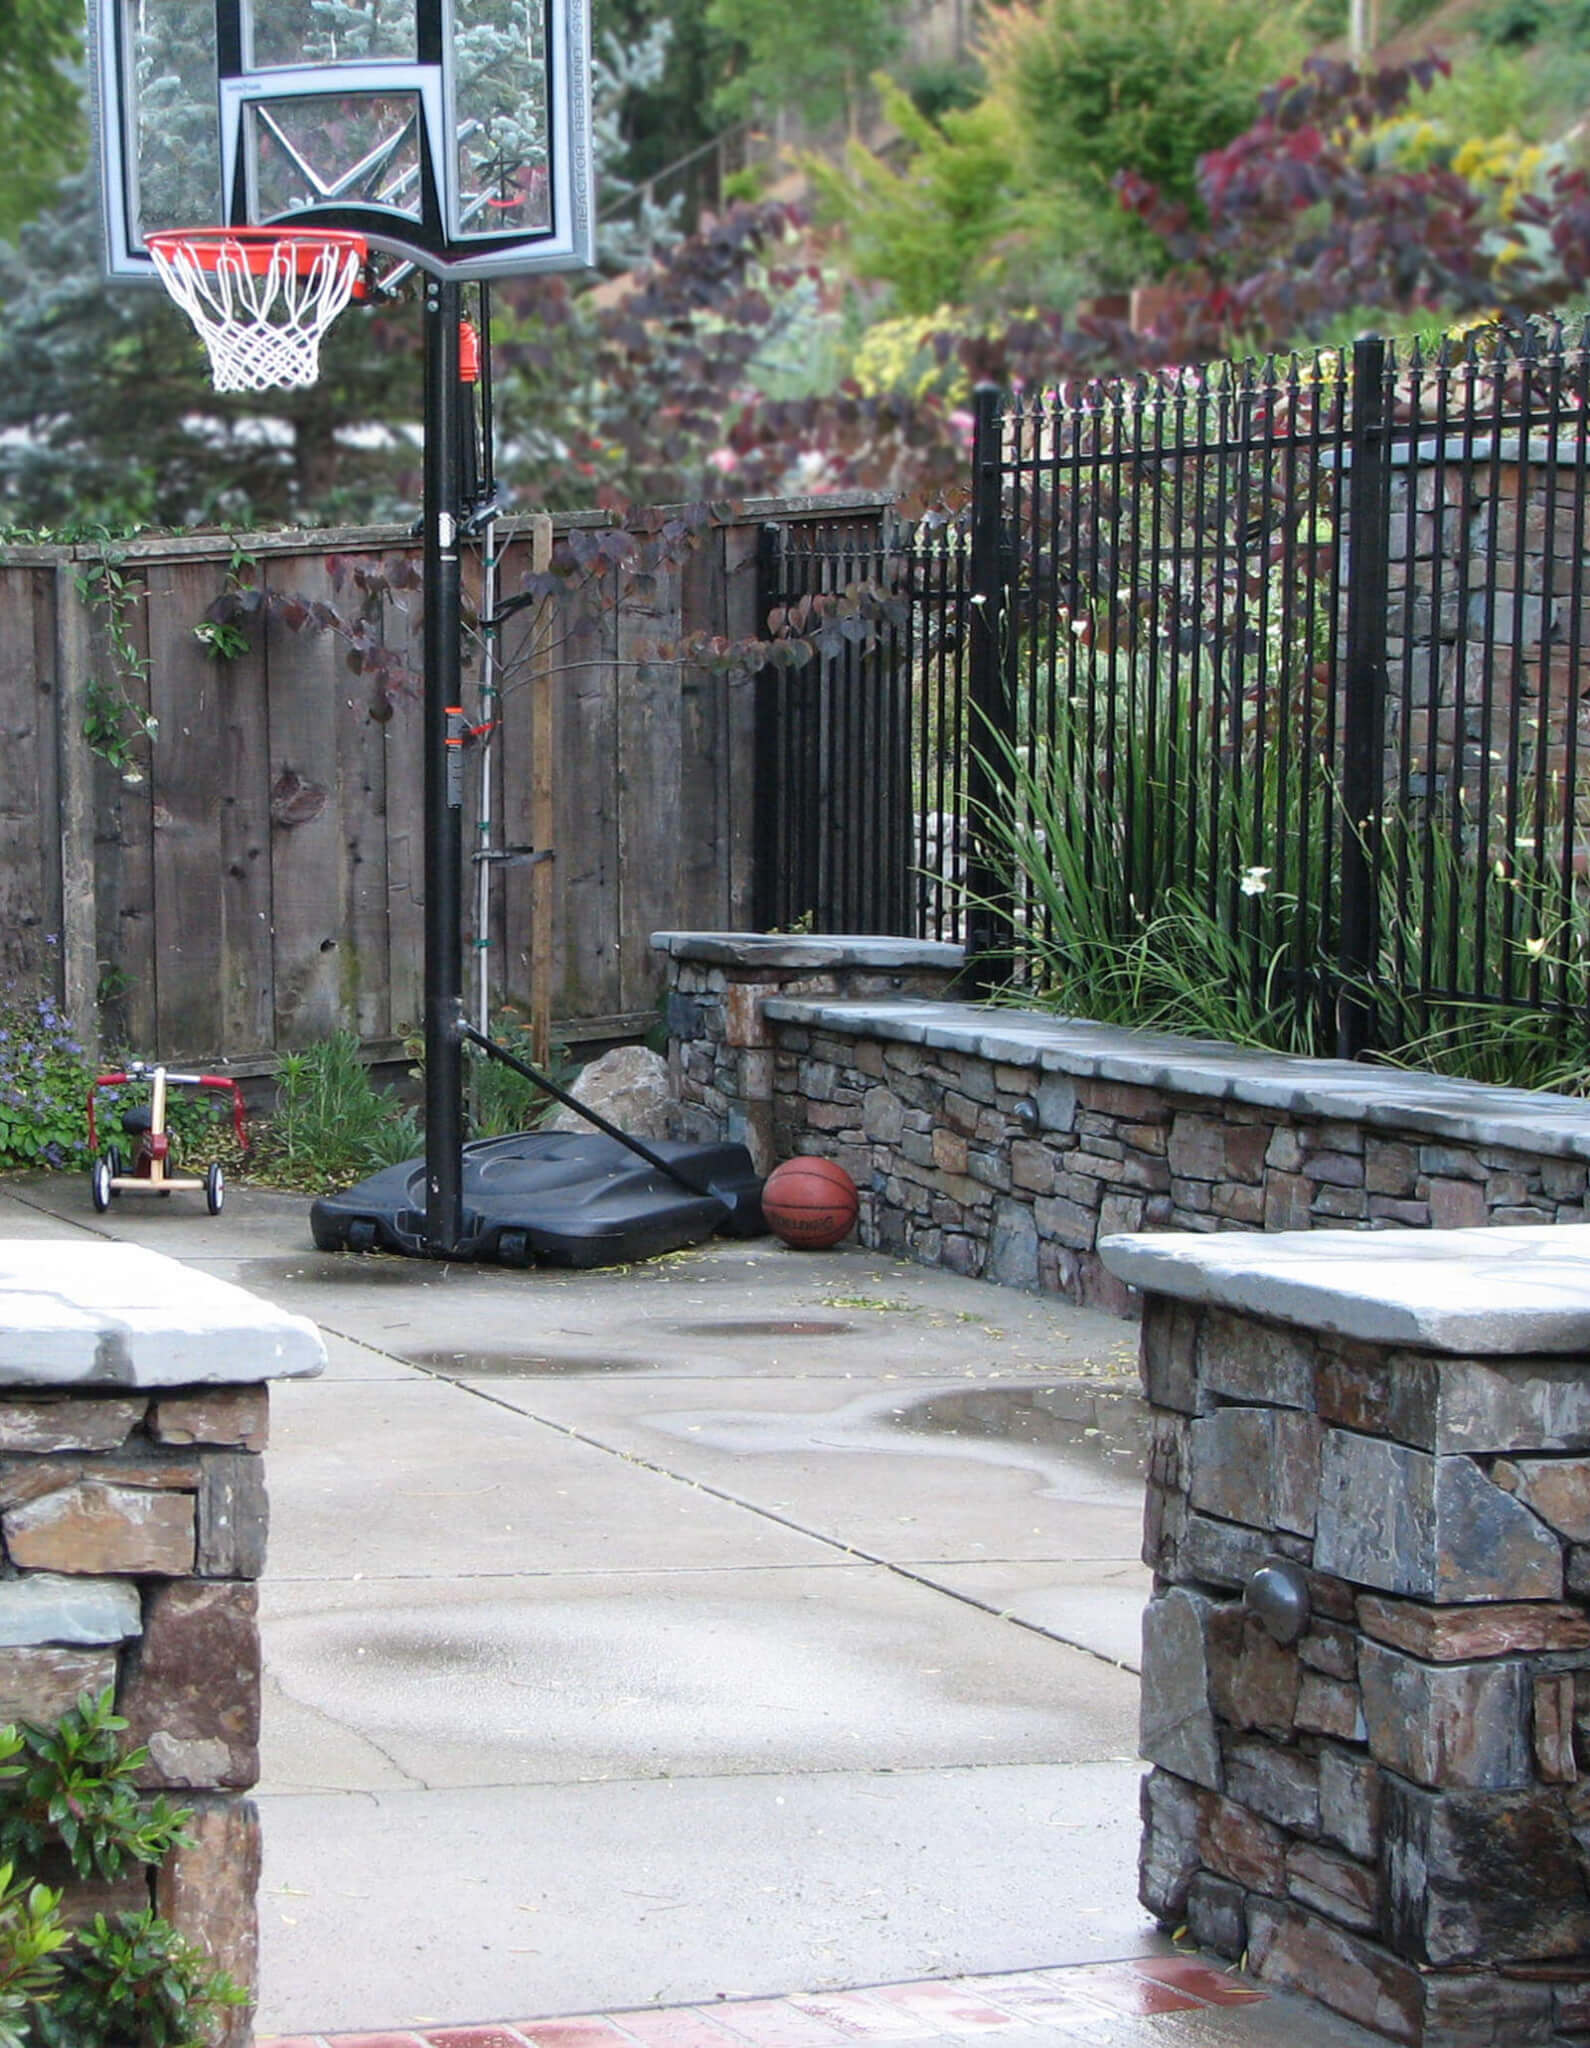 Concrete deck play area with basketball hoop, lined with tile-topped rock walls and rod iron fence.